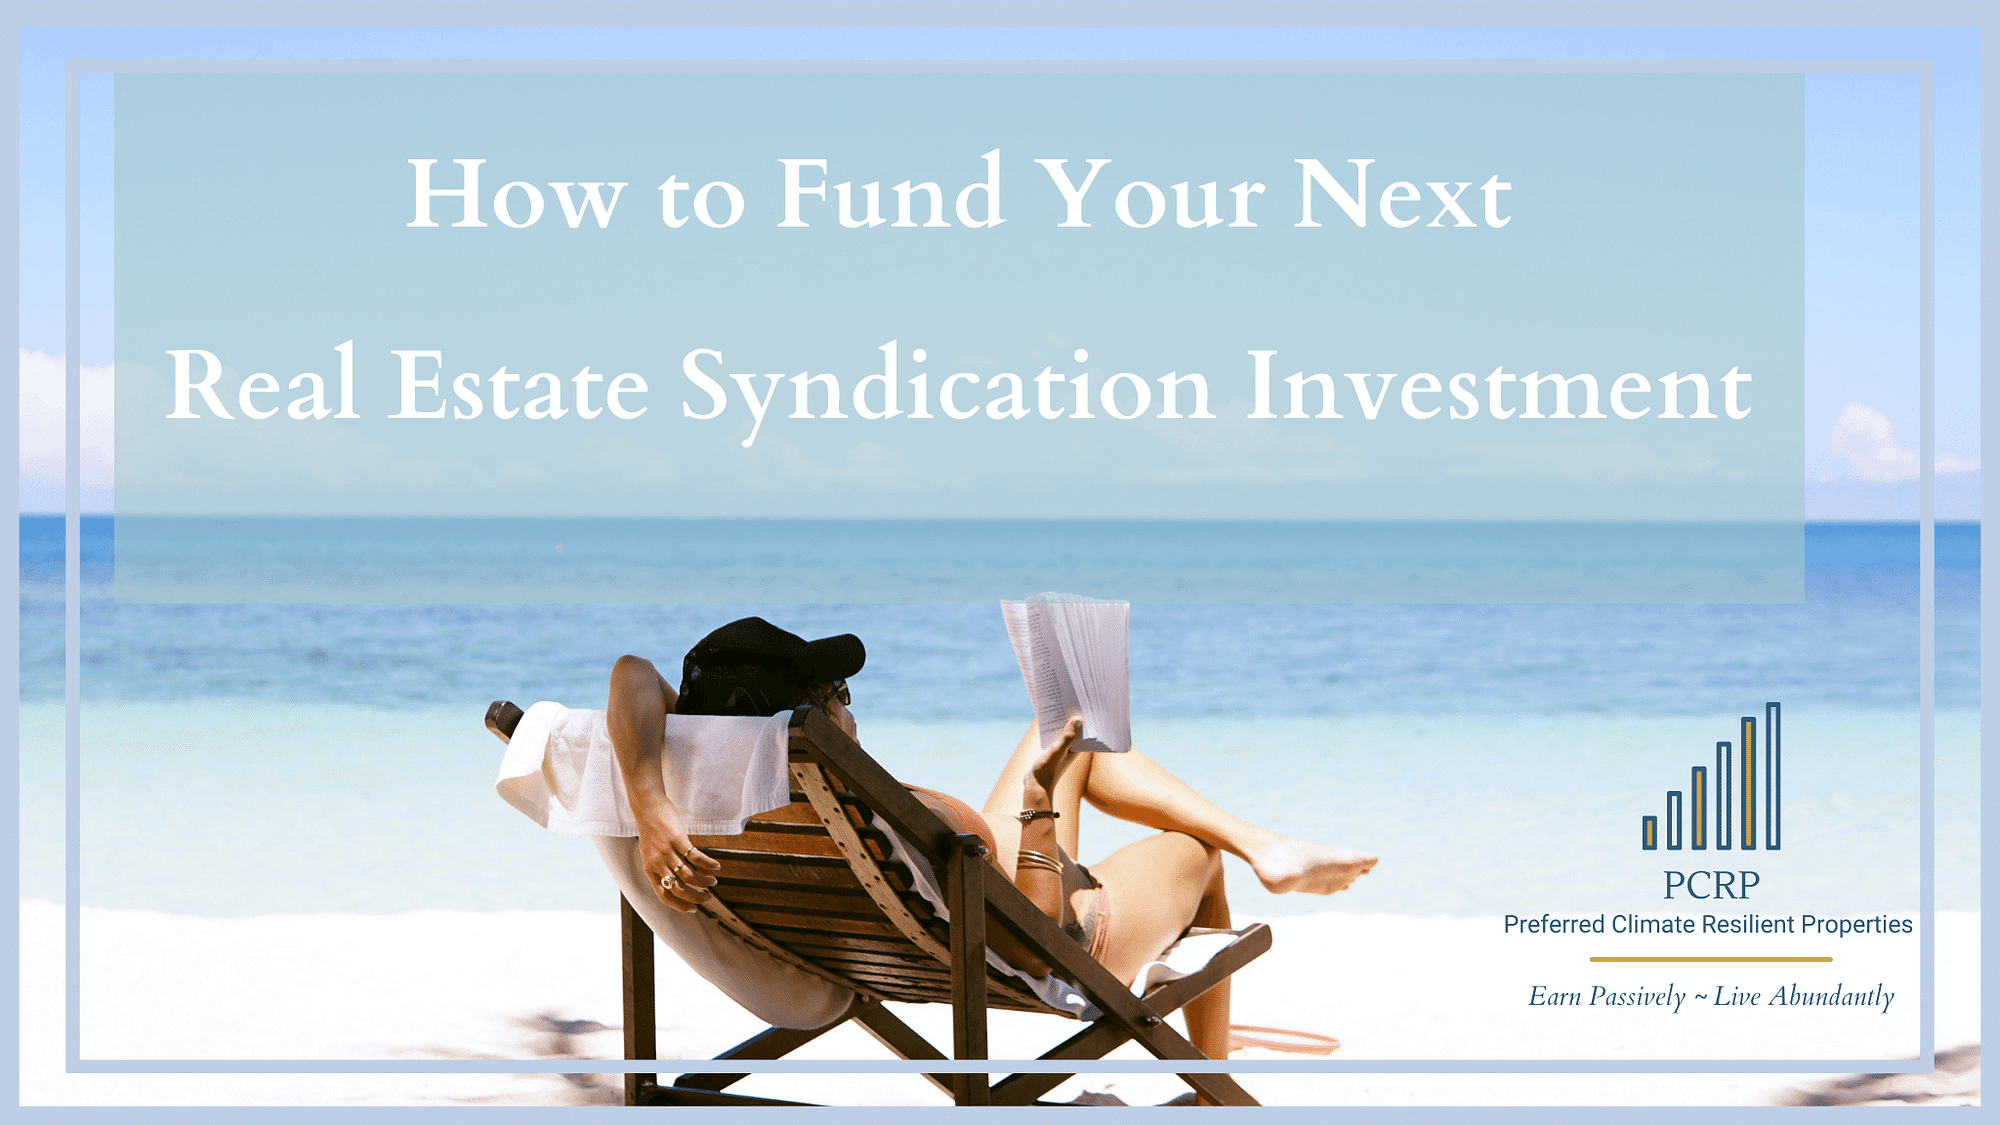 How to Fund Your Next Real Estate Syndication Investment